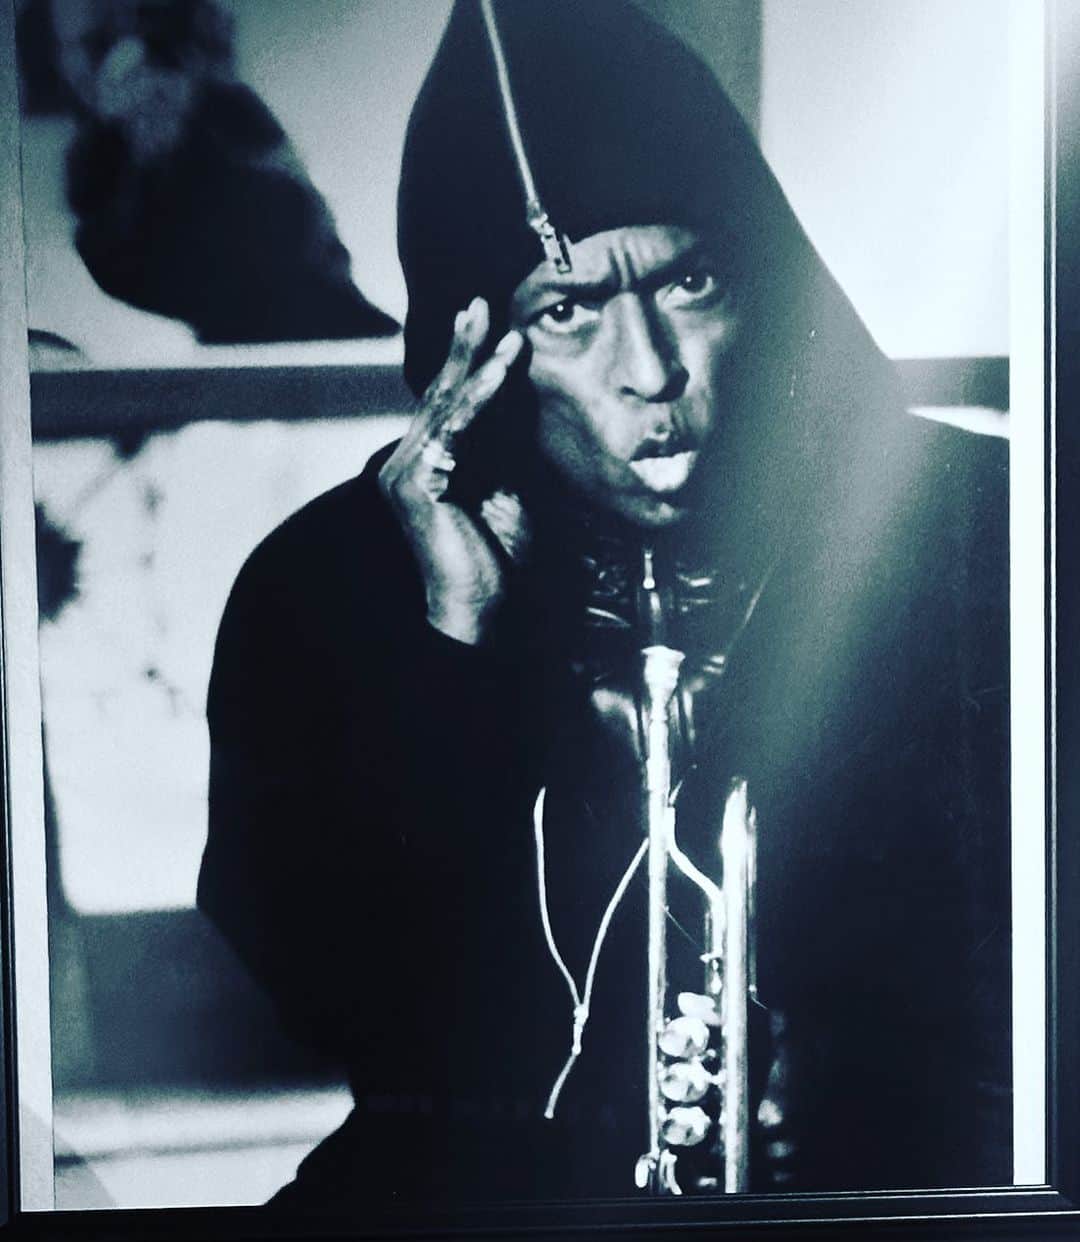 日野賢二さんのインスタグラム写真 - (日野賢二Instagram)「Just love this picture of Miles! You can see rare Miles David Photographs @ Absolute Blue ( live house club joint but also got the gallery vibe)  Works of designer  Koshin Satoh (Arrston Volaju) Miles wore his wardrobe and I was wearing them in the 90’s and so did my Father,Marcus,Misia,Cameo,Andy Warhol to name a Few.  About 70 works by costume designer Kohshin Satoh for Miles Davis and Marcus Miller will be exhibited and sold at Absolute Blue!  Most of them are one-of-a-kind items that you can't get anywhere else, such as for exhibitions in Paris. All the works you want to see just by looking at them. Please let me know if you find something you want for your stage costume or everyday use. We will discuss the price with you 😊✨💖  [Date and time] 7/26 (Wed)-29 (Sat) 11:00-21:00 [Venue] Ikebukuro Ekimae Live House "Absolute Blue" 　　　　https://absol.blue [Address] 1-15-6 Nishi-Ikebukuro, Toshima-ku, Tokyo 171-0021 Toshima Kaikan B2F [Tel] 03-5904-8576  ★Reservations are not required. Please come along 😊  ▼Kohshin Satoh https://www.kohshinsatoh.jp/about-me  [Designer Sato Koshin] Kohshin Satoh Established Arrston Volaju Co., Ltd. in 1975. He has attracted attention for his free-spirited and fresh designs that break the conventional concepts and common sense of the fashion world.  Since 1983, he has participated in the Tokyo Collection, sparking a men's designer brand boom.  Its momentum has developed into a social phenomenon, influencing not only the clothing industry, but also youth customs and many other industries.  He was highly regarded overseas as a leading Japanese menswear designer, and was worn by world-famous superstars such as jazz trumpeter Miles Davis and famous pop art artist Andy Warhol.  Since 1986, he has participated in two major collections in Paris and New York, and has established his position as a world-famous designer both in name and reality.  He is also talented in interior design, wristwatches, objects, and graphics.」7月13日 18時13分 - jinobass